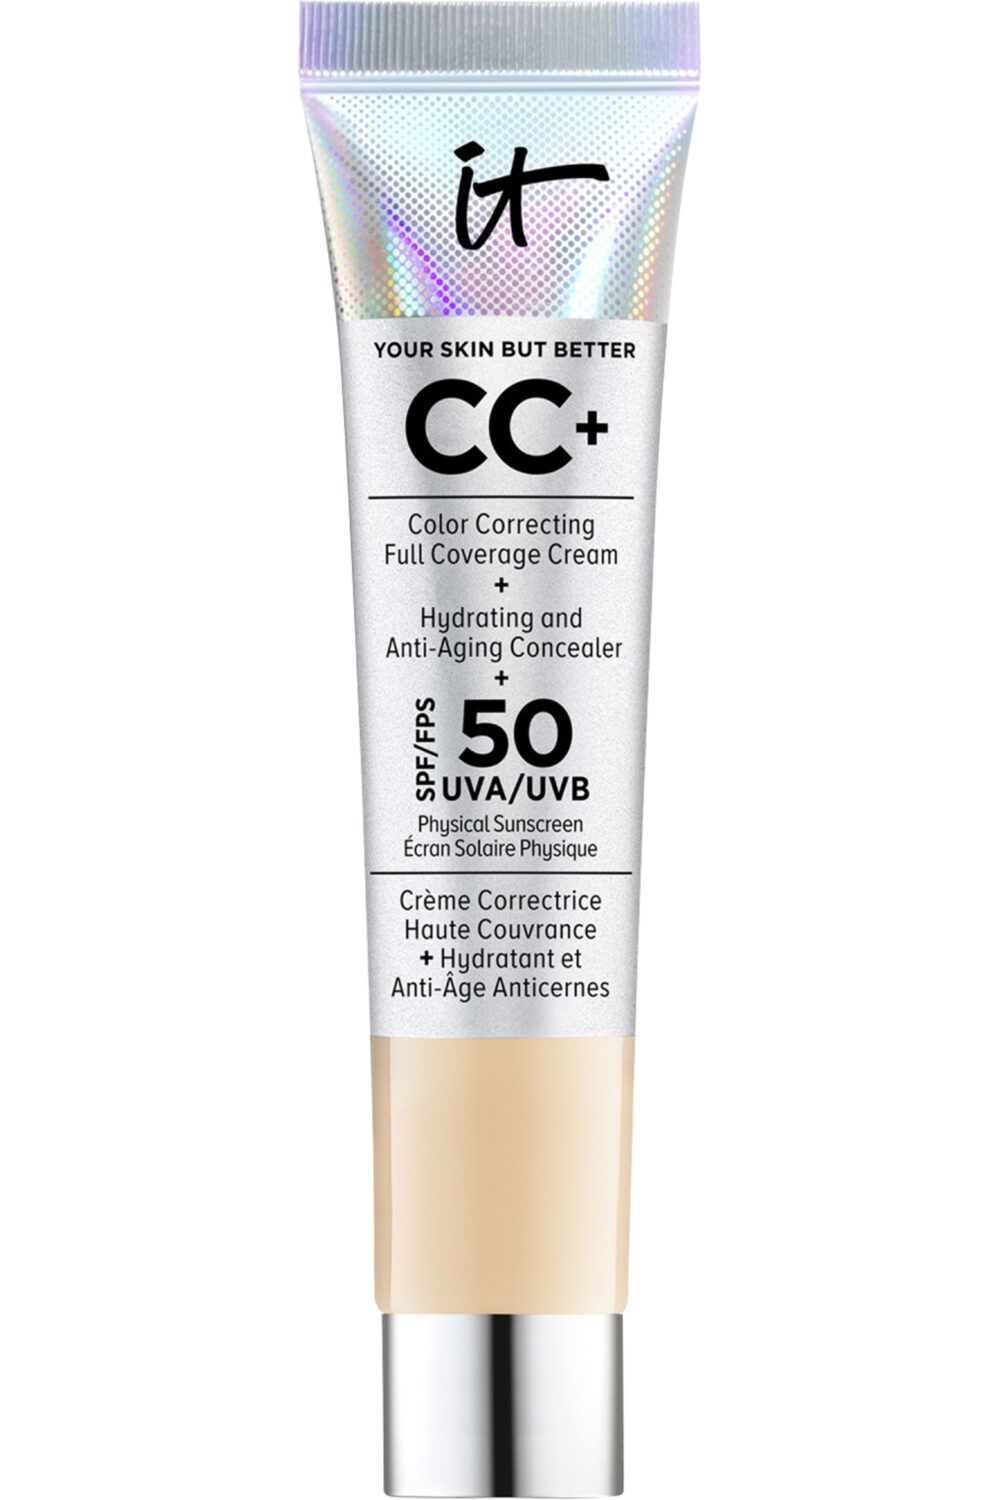 it Cosmetics - CC Crème correctrice & anti-âge SPF50 Your Skin But Better™ 12mL Light